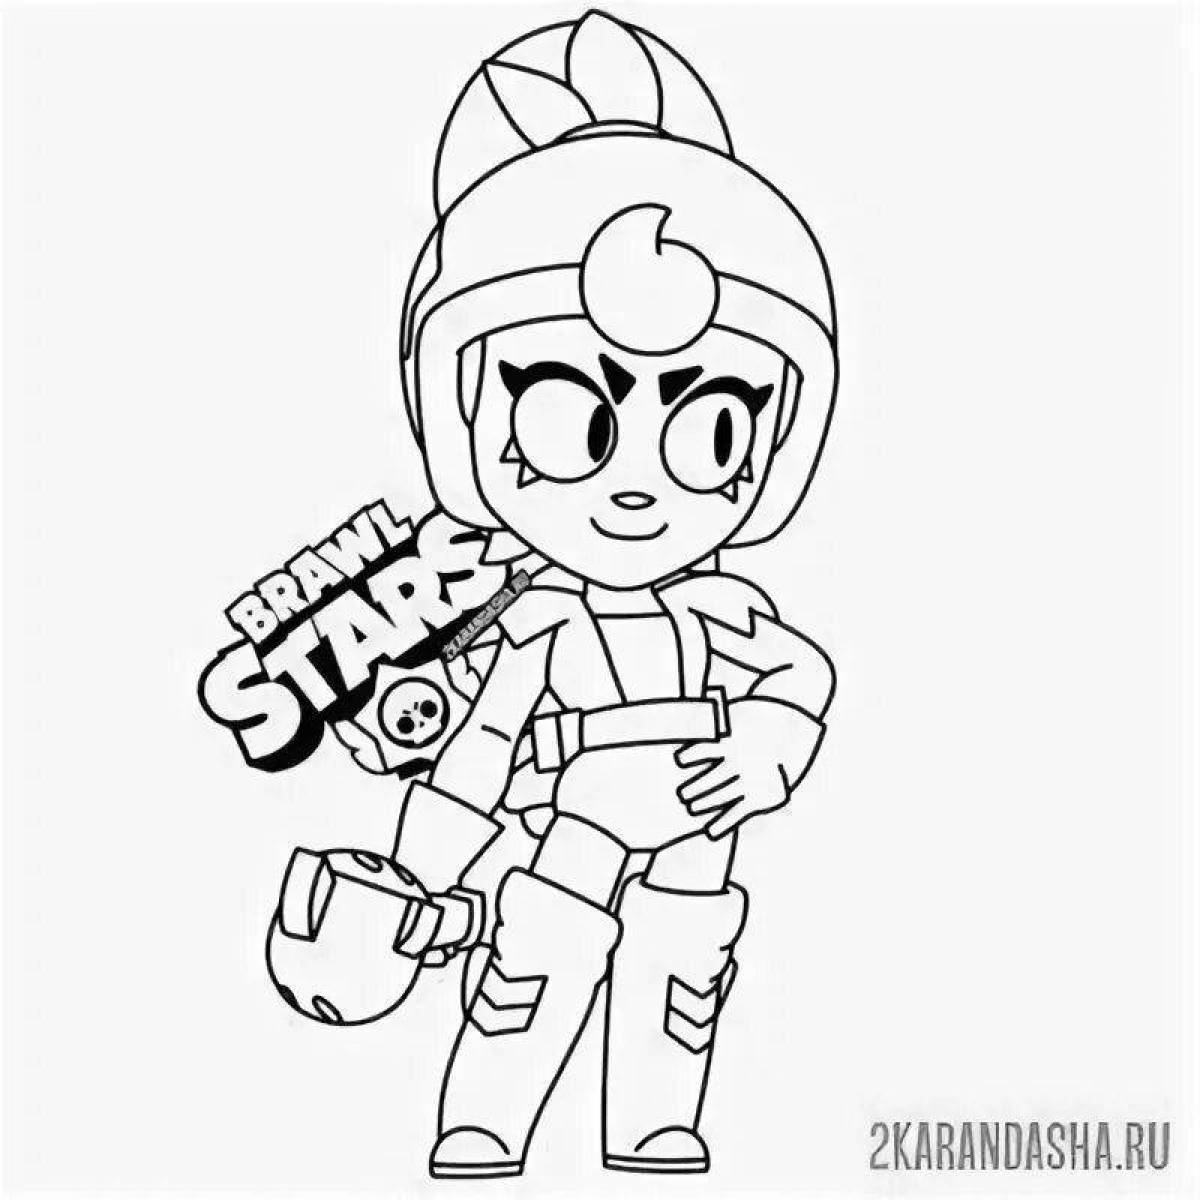 Animated bonnie from bravo stars coloring page